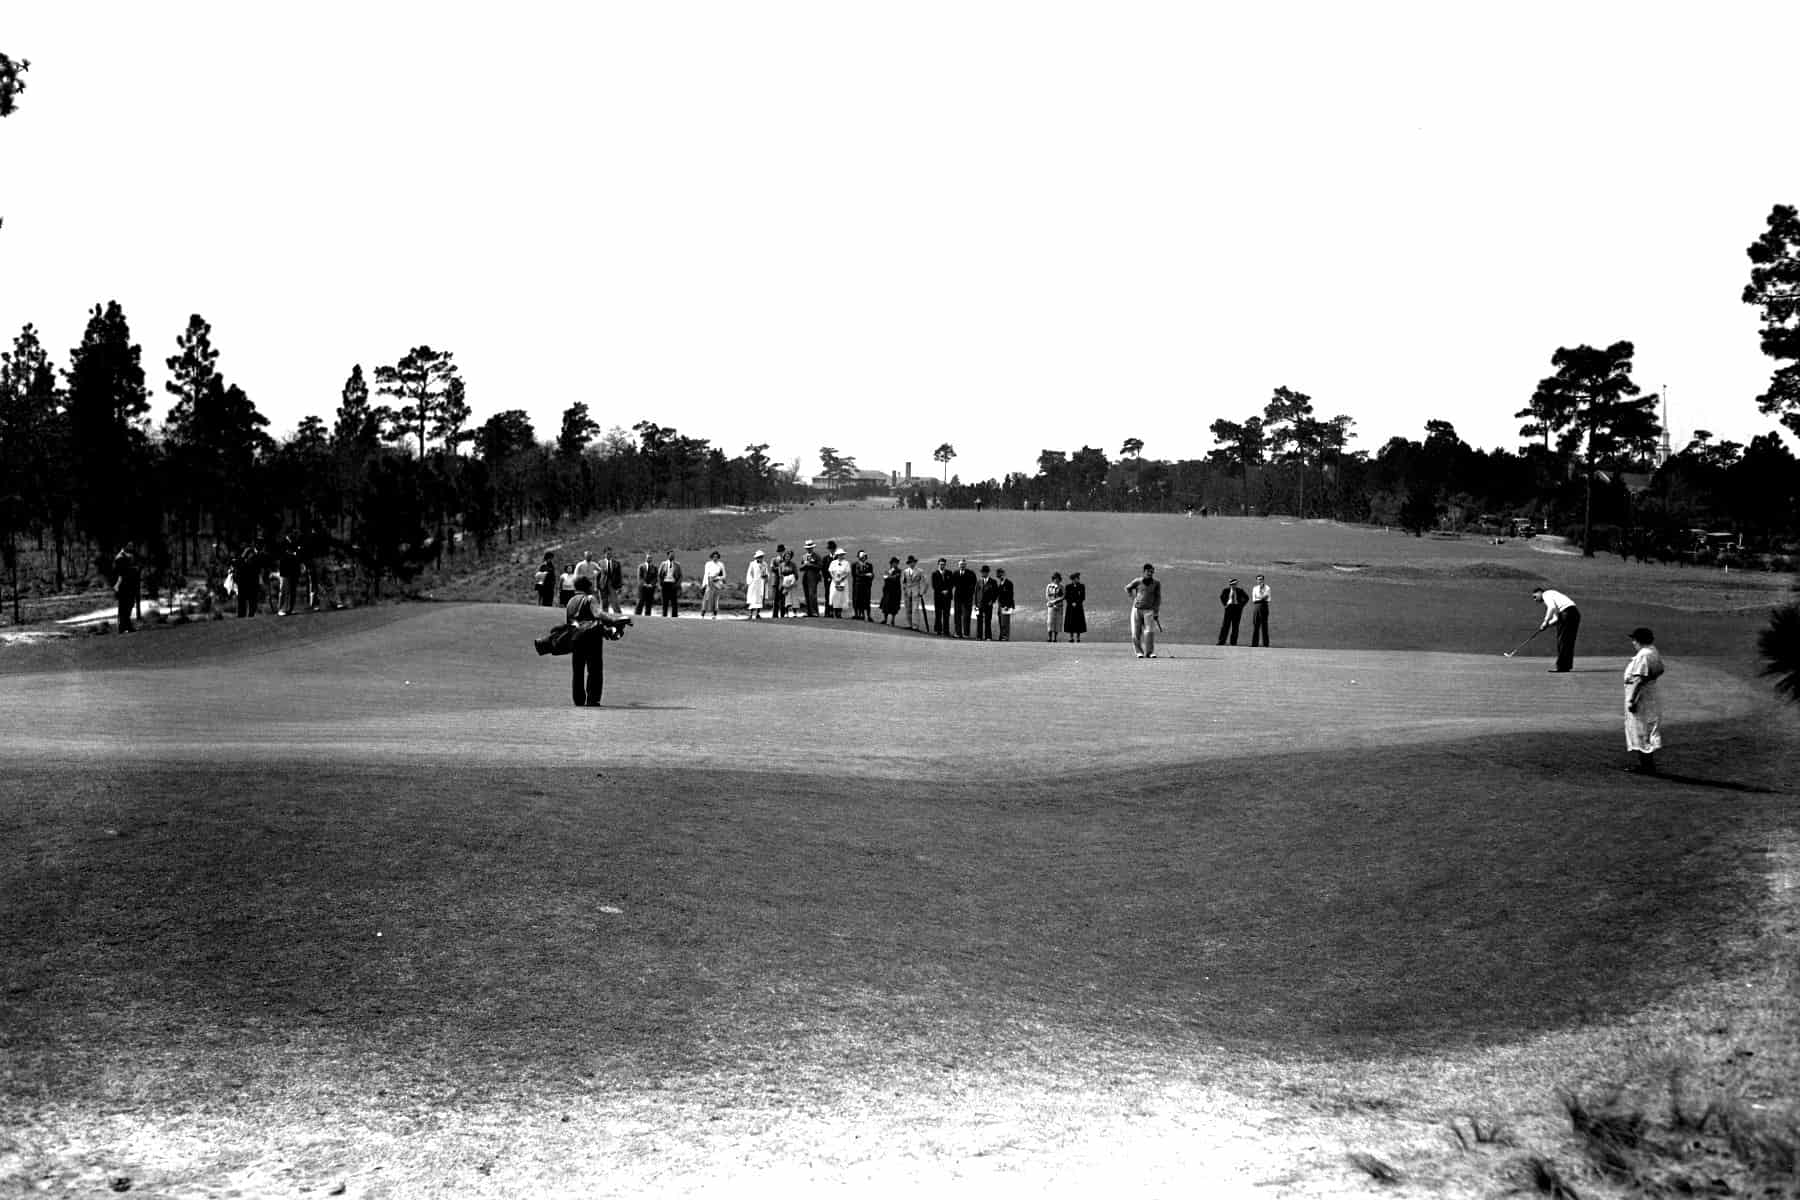 In the mid-1930s, famed architect Donald Ross, perhaps miffed because of losing out on a chance to design Bobby Jones' new course in Augusta, Ga., refocused his efforts into his prived Pinehurst No. 2. A photo from the 1936 North & South shows the care Ross took in updating his gem. This is No. 2's second green. Photo Courtesy of the Tufts Archives.